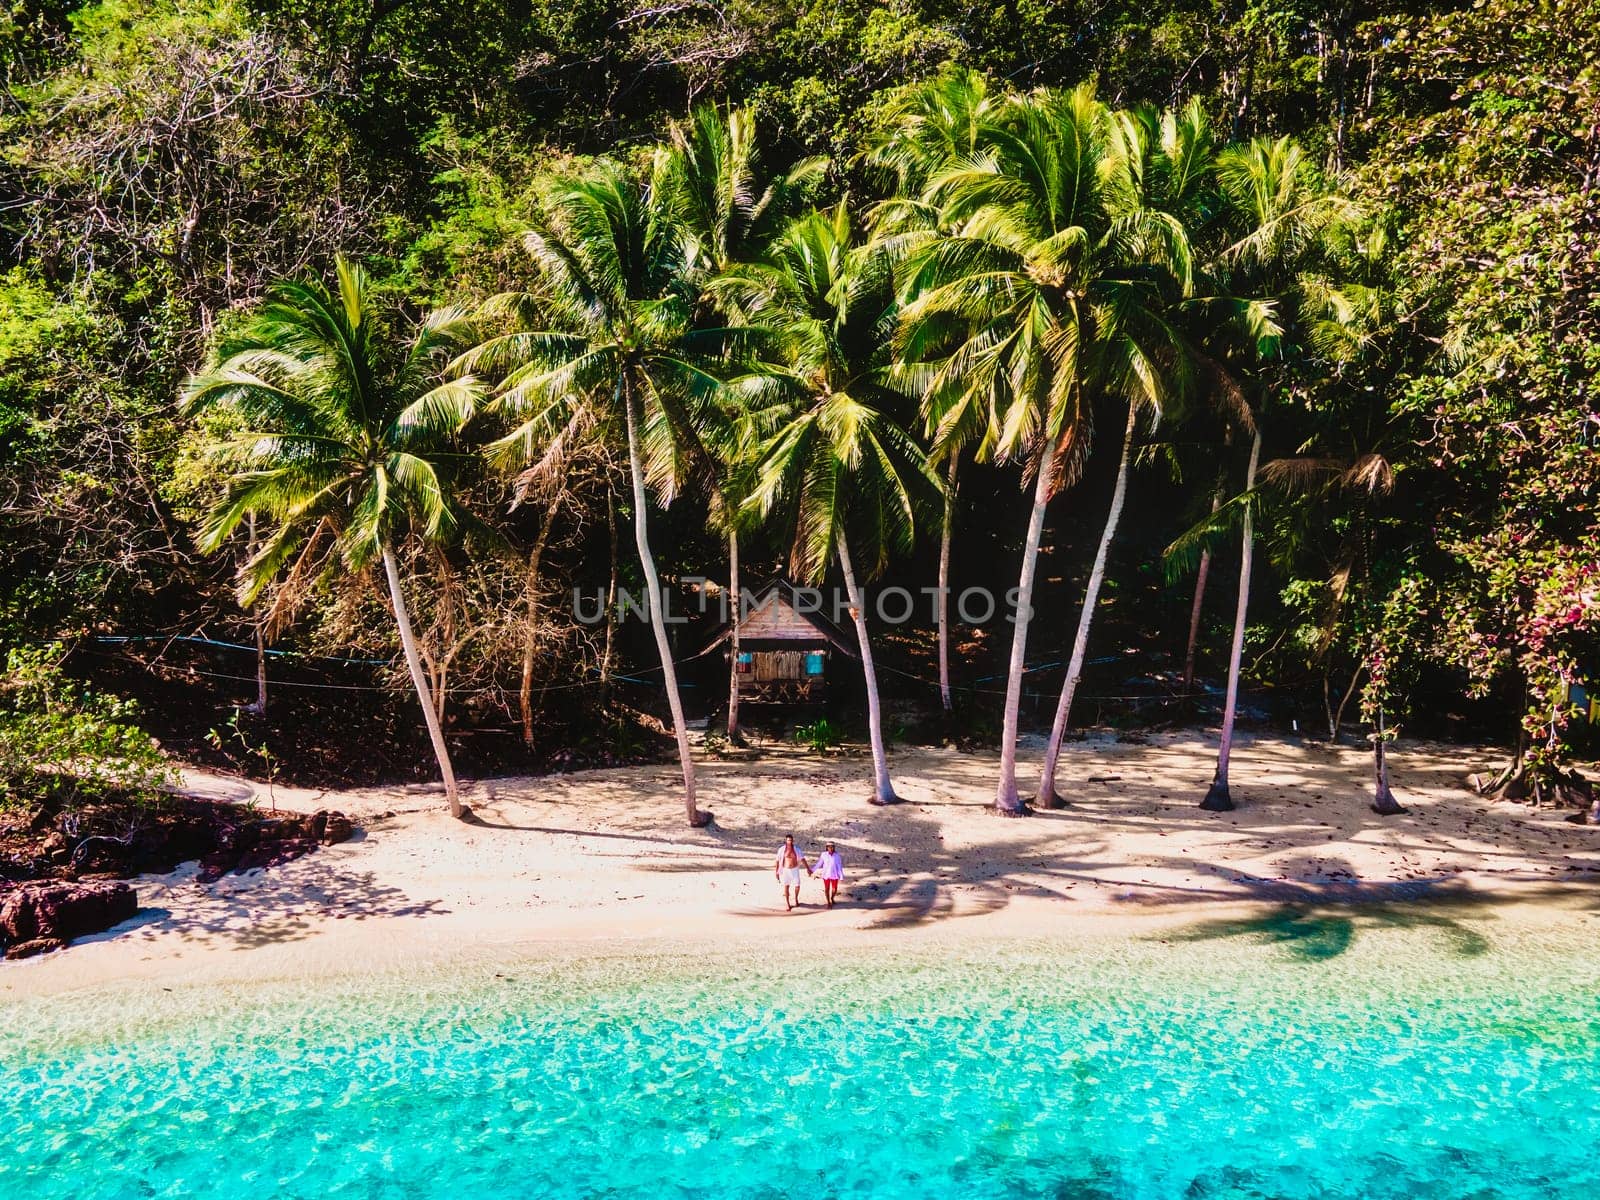 drone view at Koh Wai Island Trat Thailand is a tinny tropical Island near Koh Chang. wooden bamboo hut bungalow on the beach. a young couple of men and woman on a tropical Island in Thailand